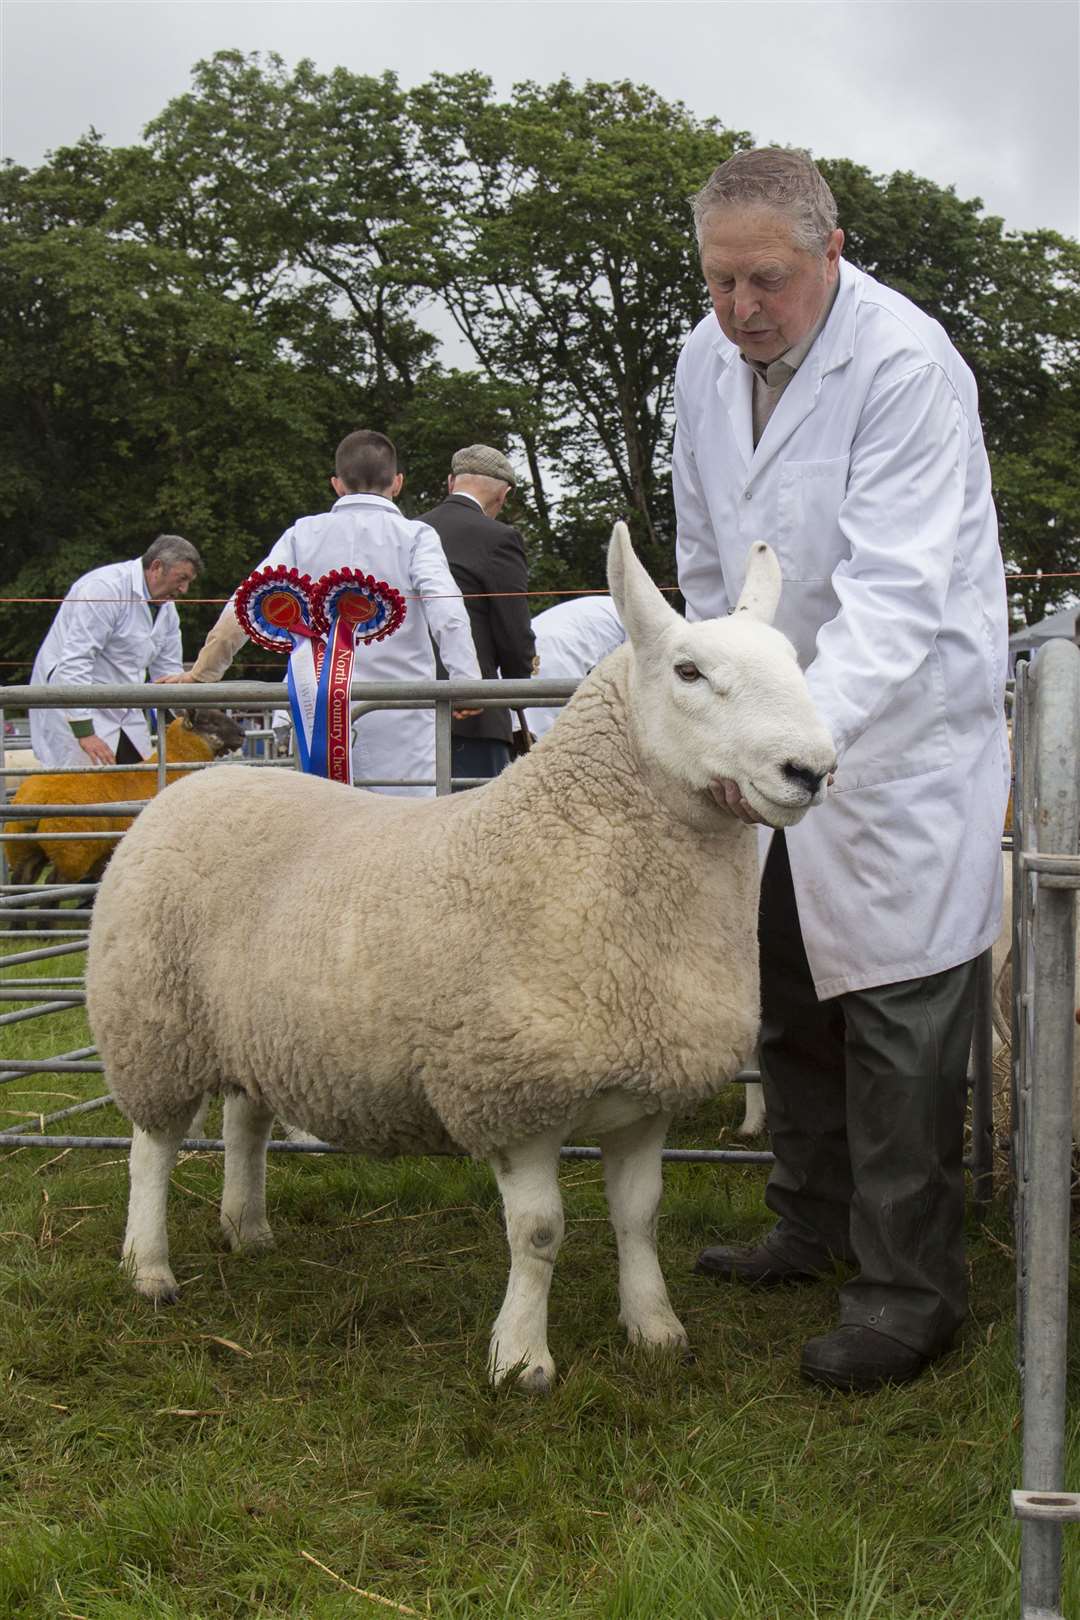 James Mackay, Biggins, Wick, took the supreme sheep championship with this North Country Cheviot gimmer that had earlier claimed the overall breed championship. Picture: Ann-Marie Jones / Northern Studios